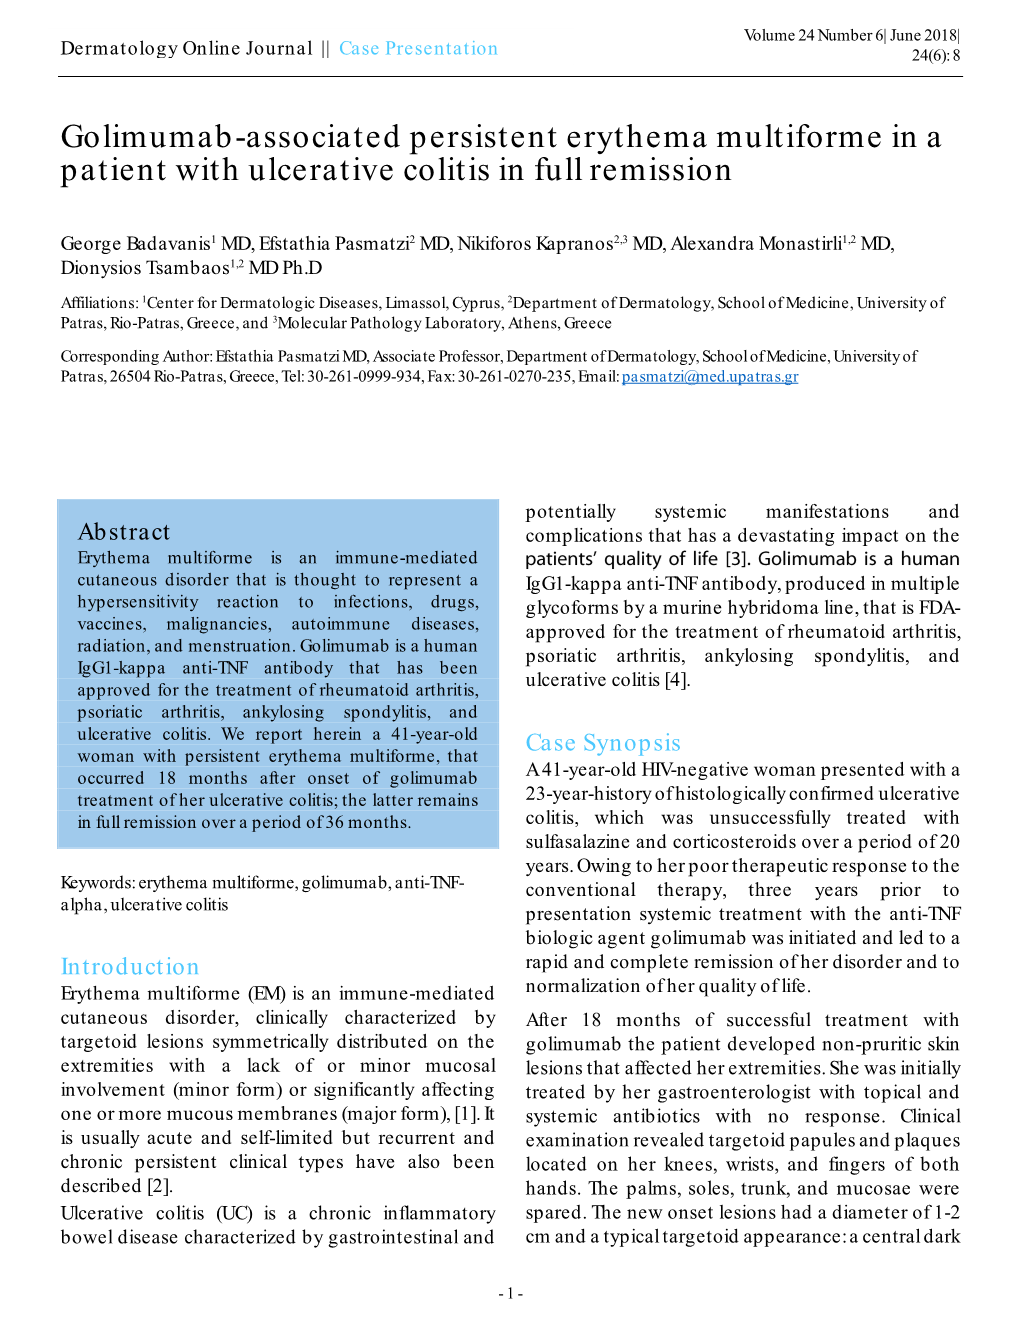 Golimumab-Associated Persistent Erythema Multiforme in a Patient with Ulcerative Colitis in Full Remission